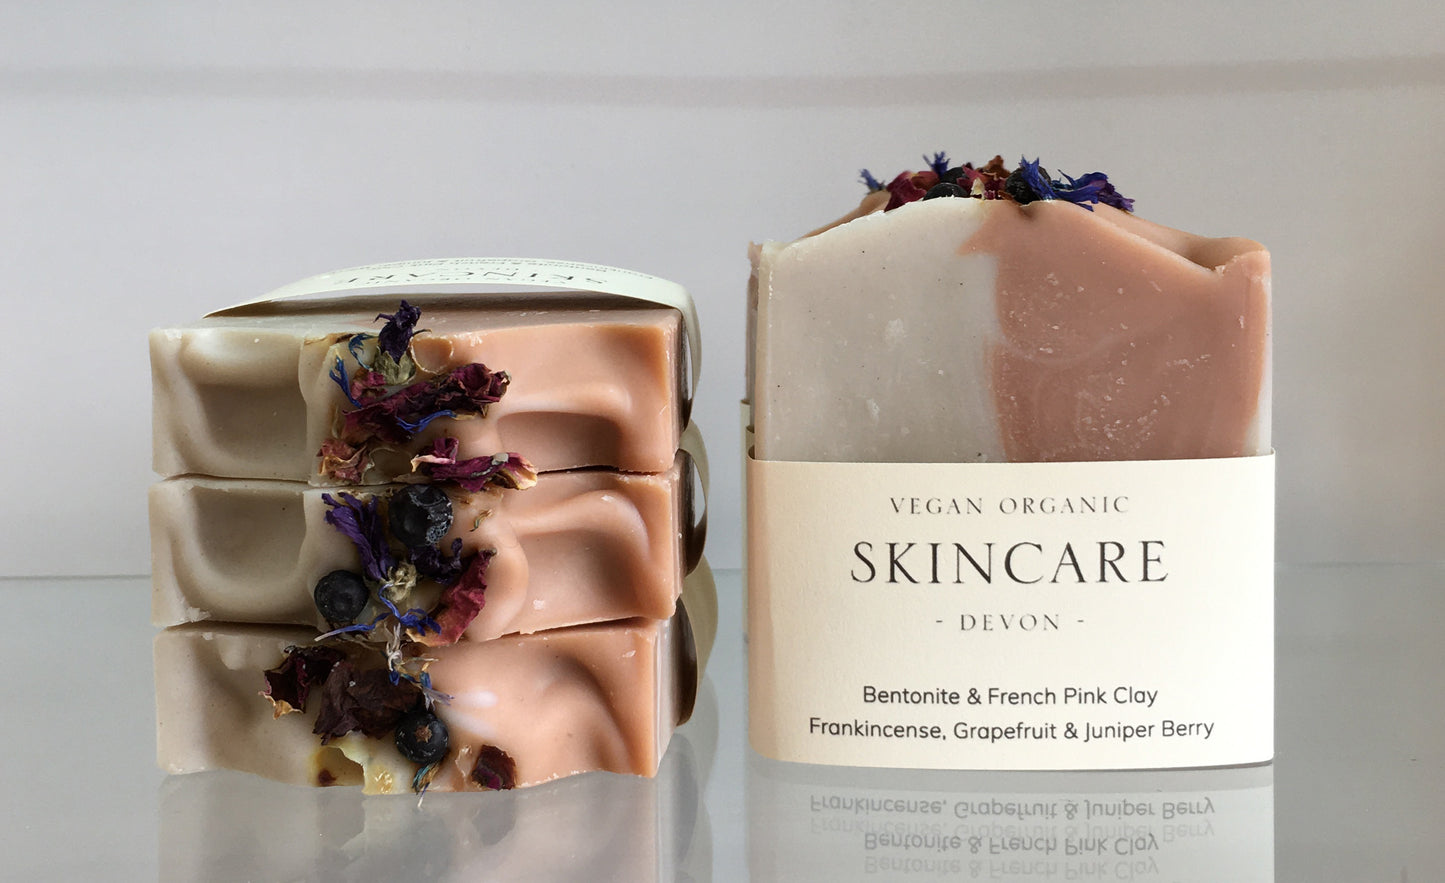 Bentonite & French Pink Clay Soap with Grapefruit, Juniper Berry & Frankincense 100g